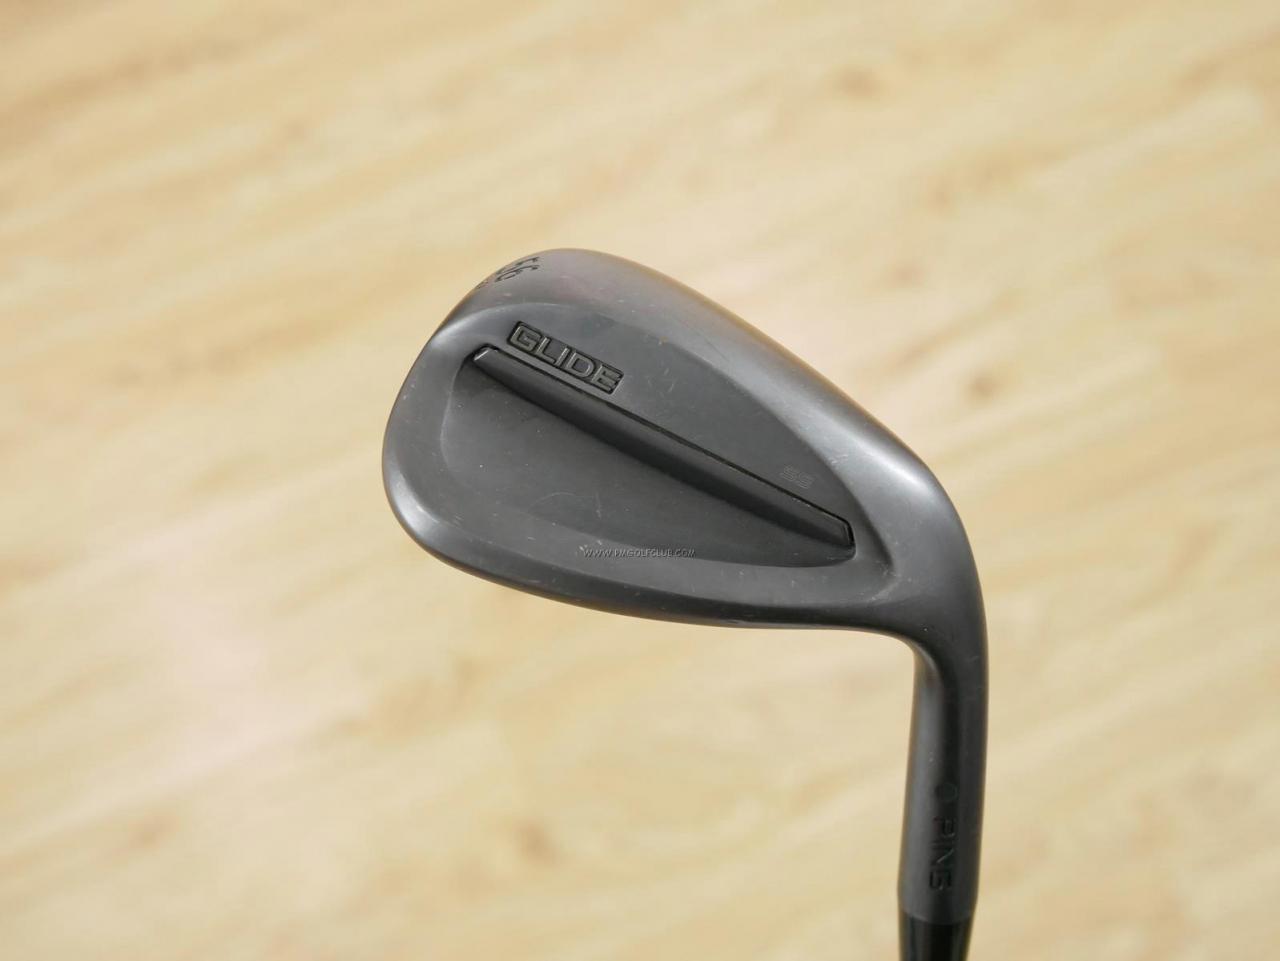 Wedge : Other : Wedge Ping Glide 2.0 Loft 56 ก้านเหล็ก Dynamic Gold S200